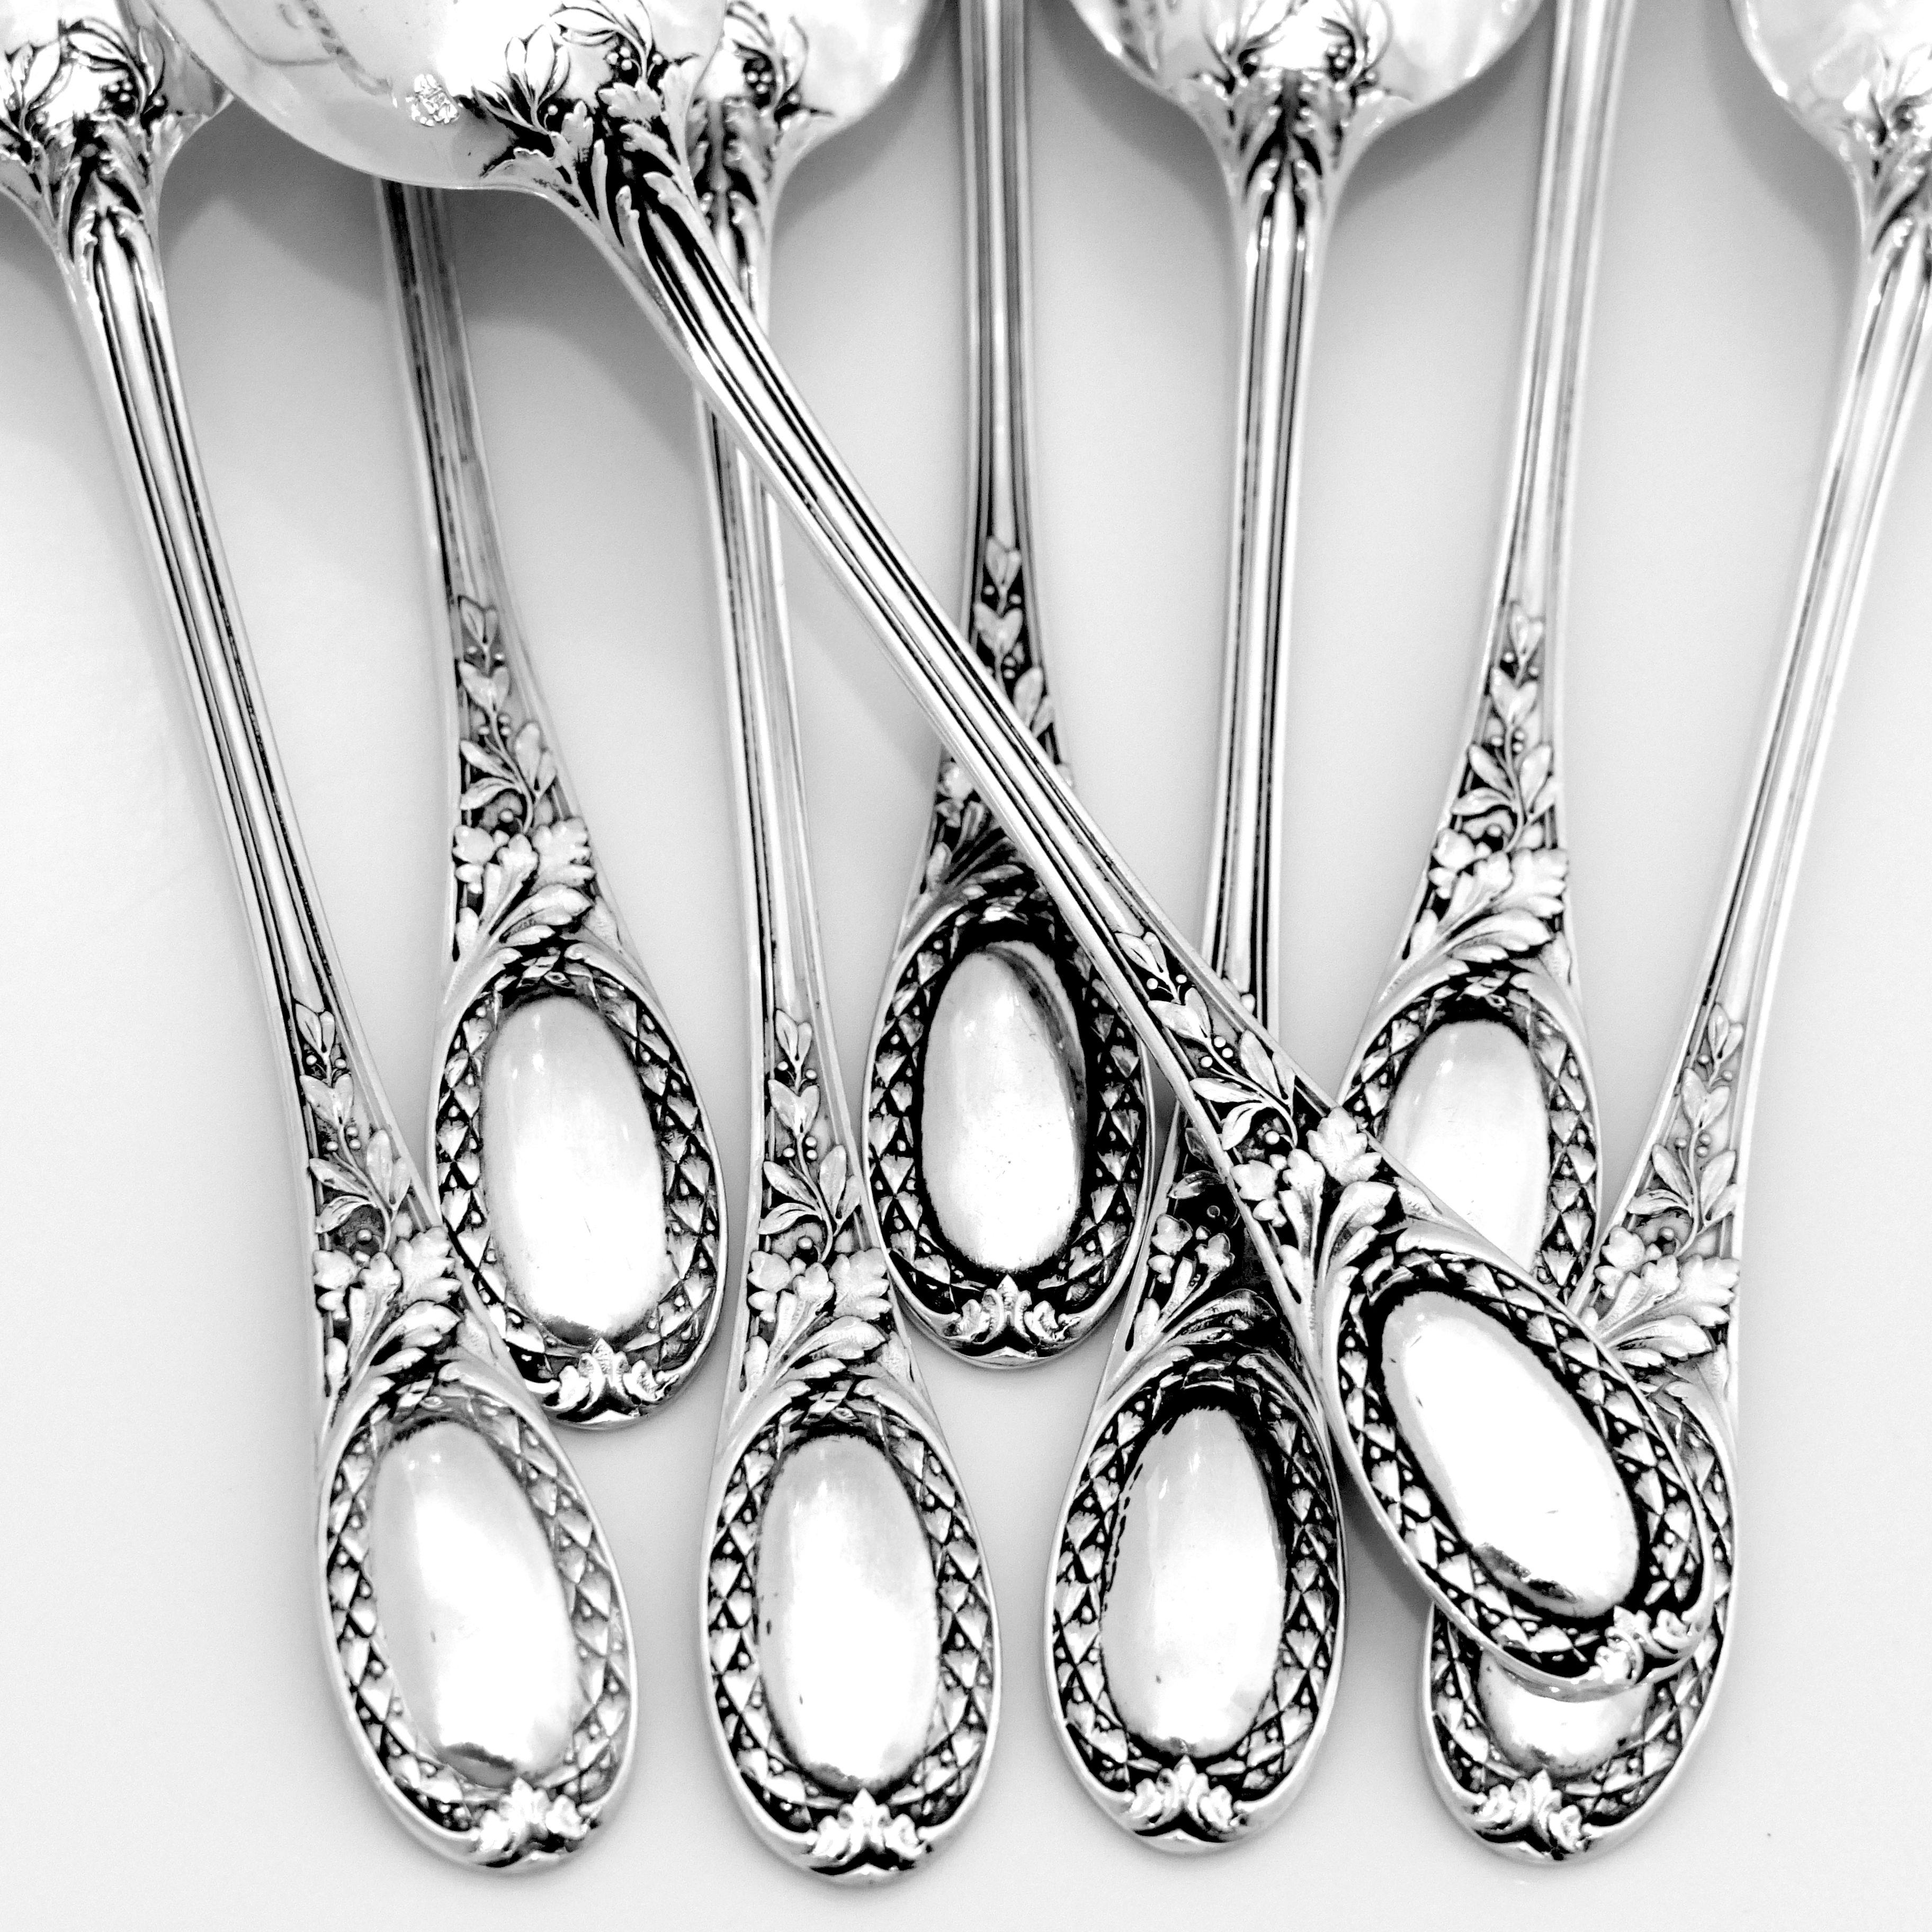 Puiforcat French Sterling Silver Coffee Dessert Spoons Set, Neoclassical For Sale 3